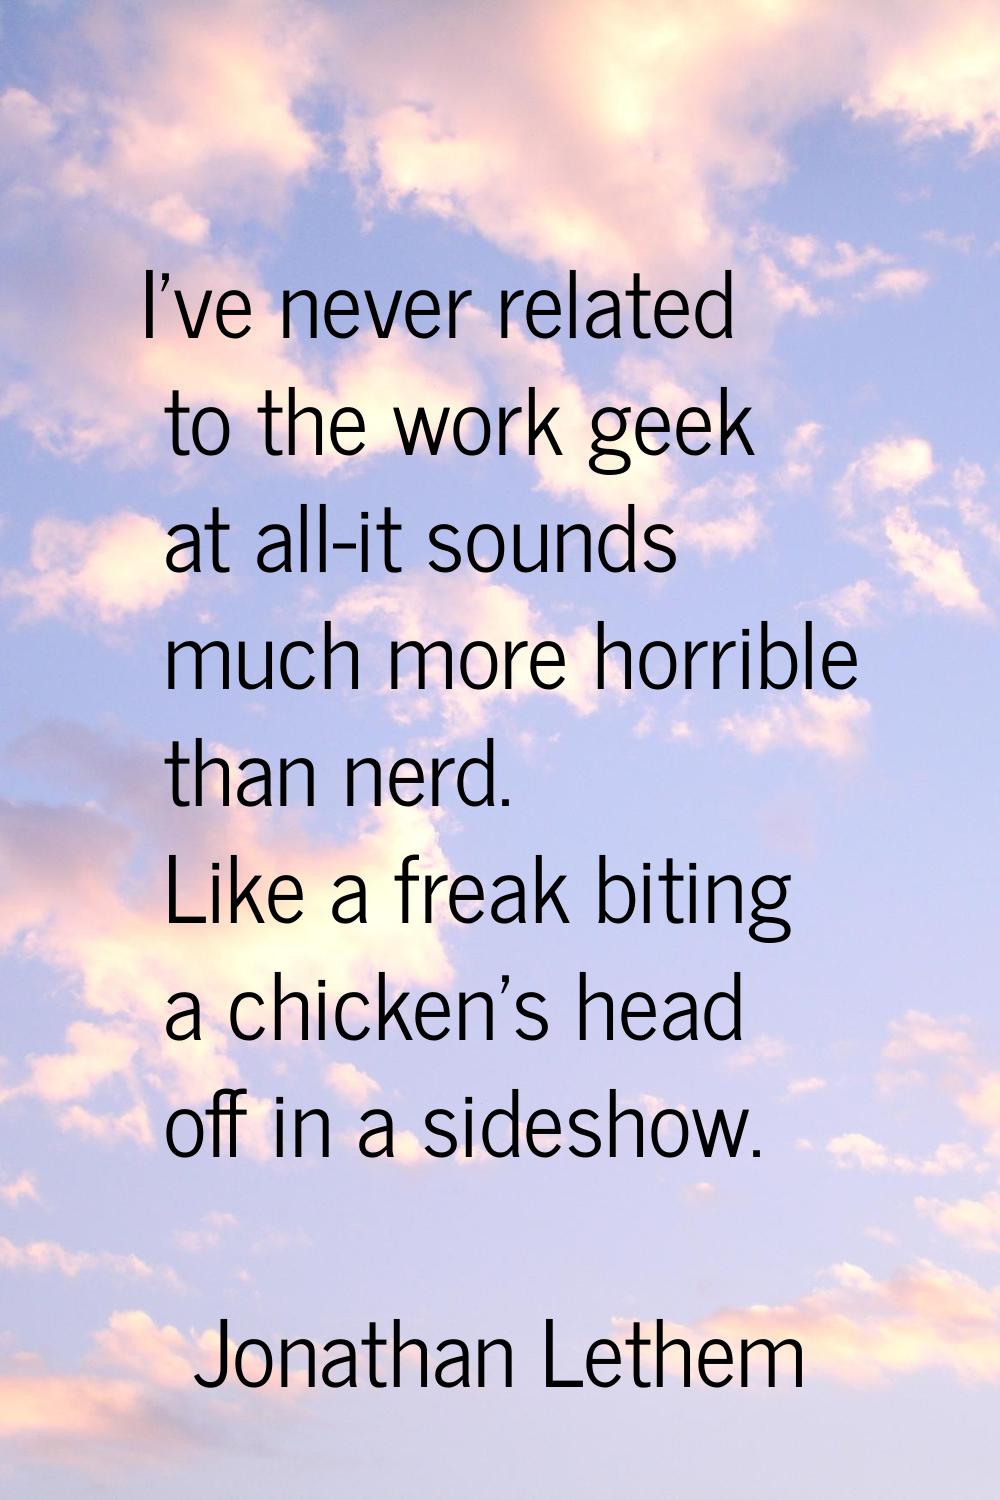 I've never related to the work geek at all-it sounds much more horrible than nerd. Like a freak bit